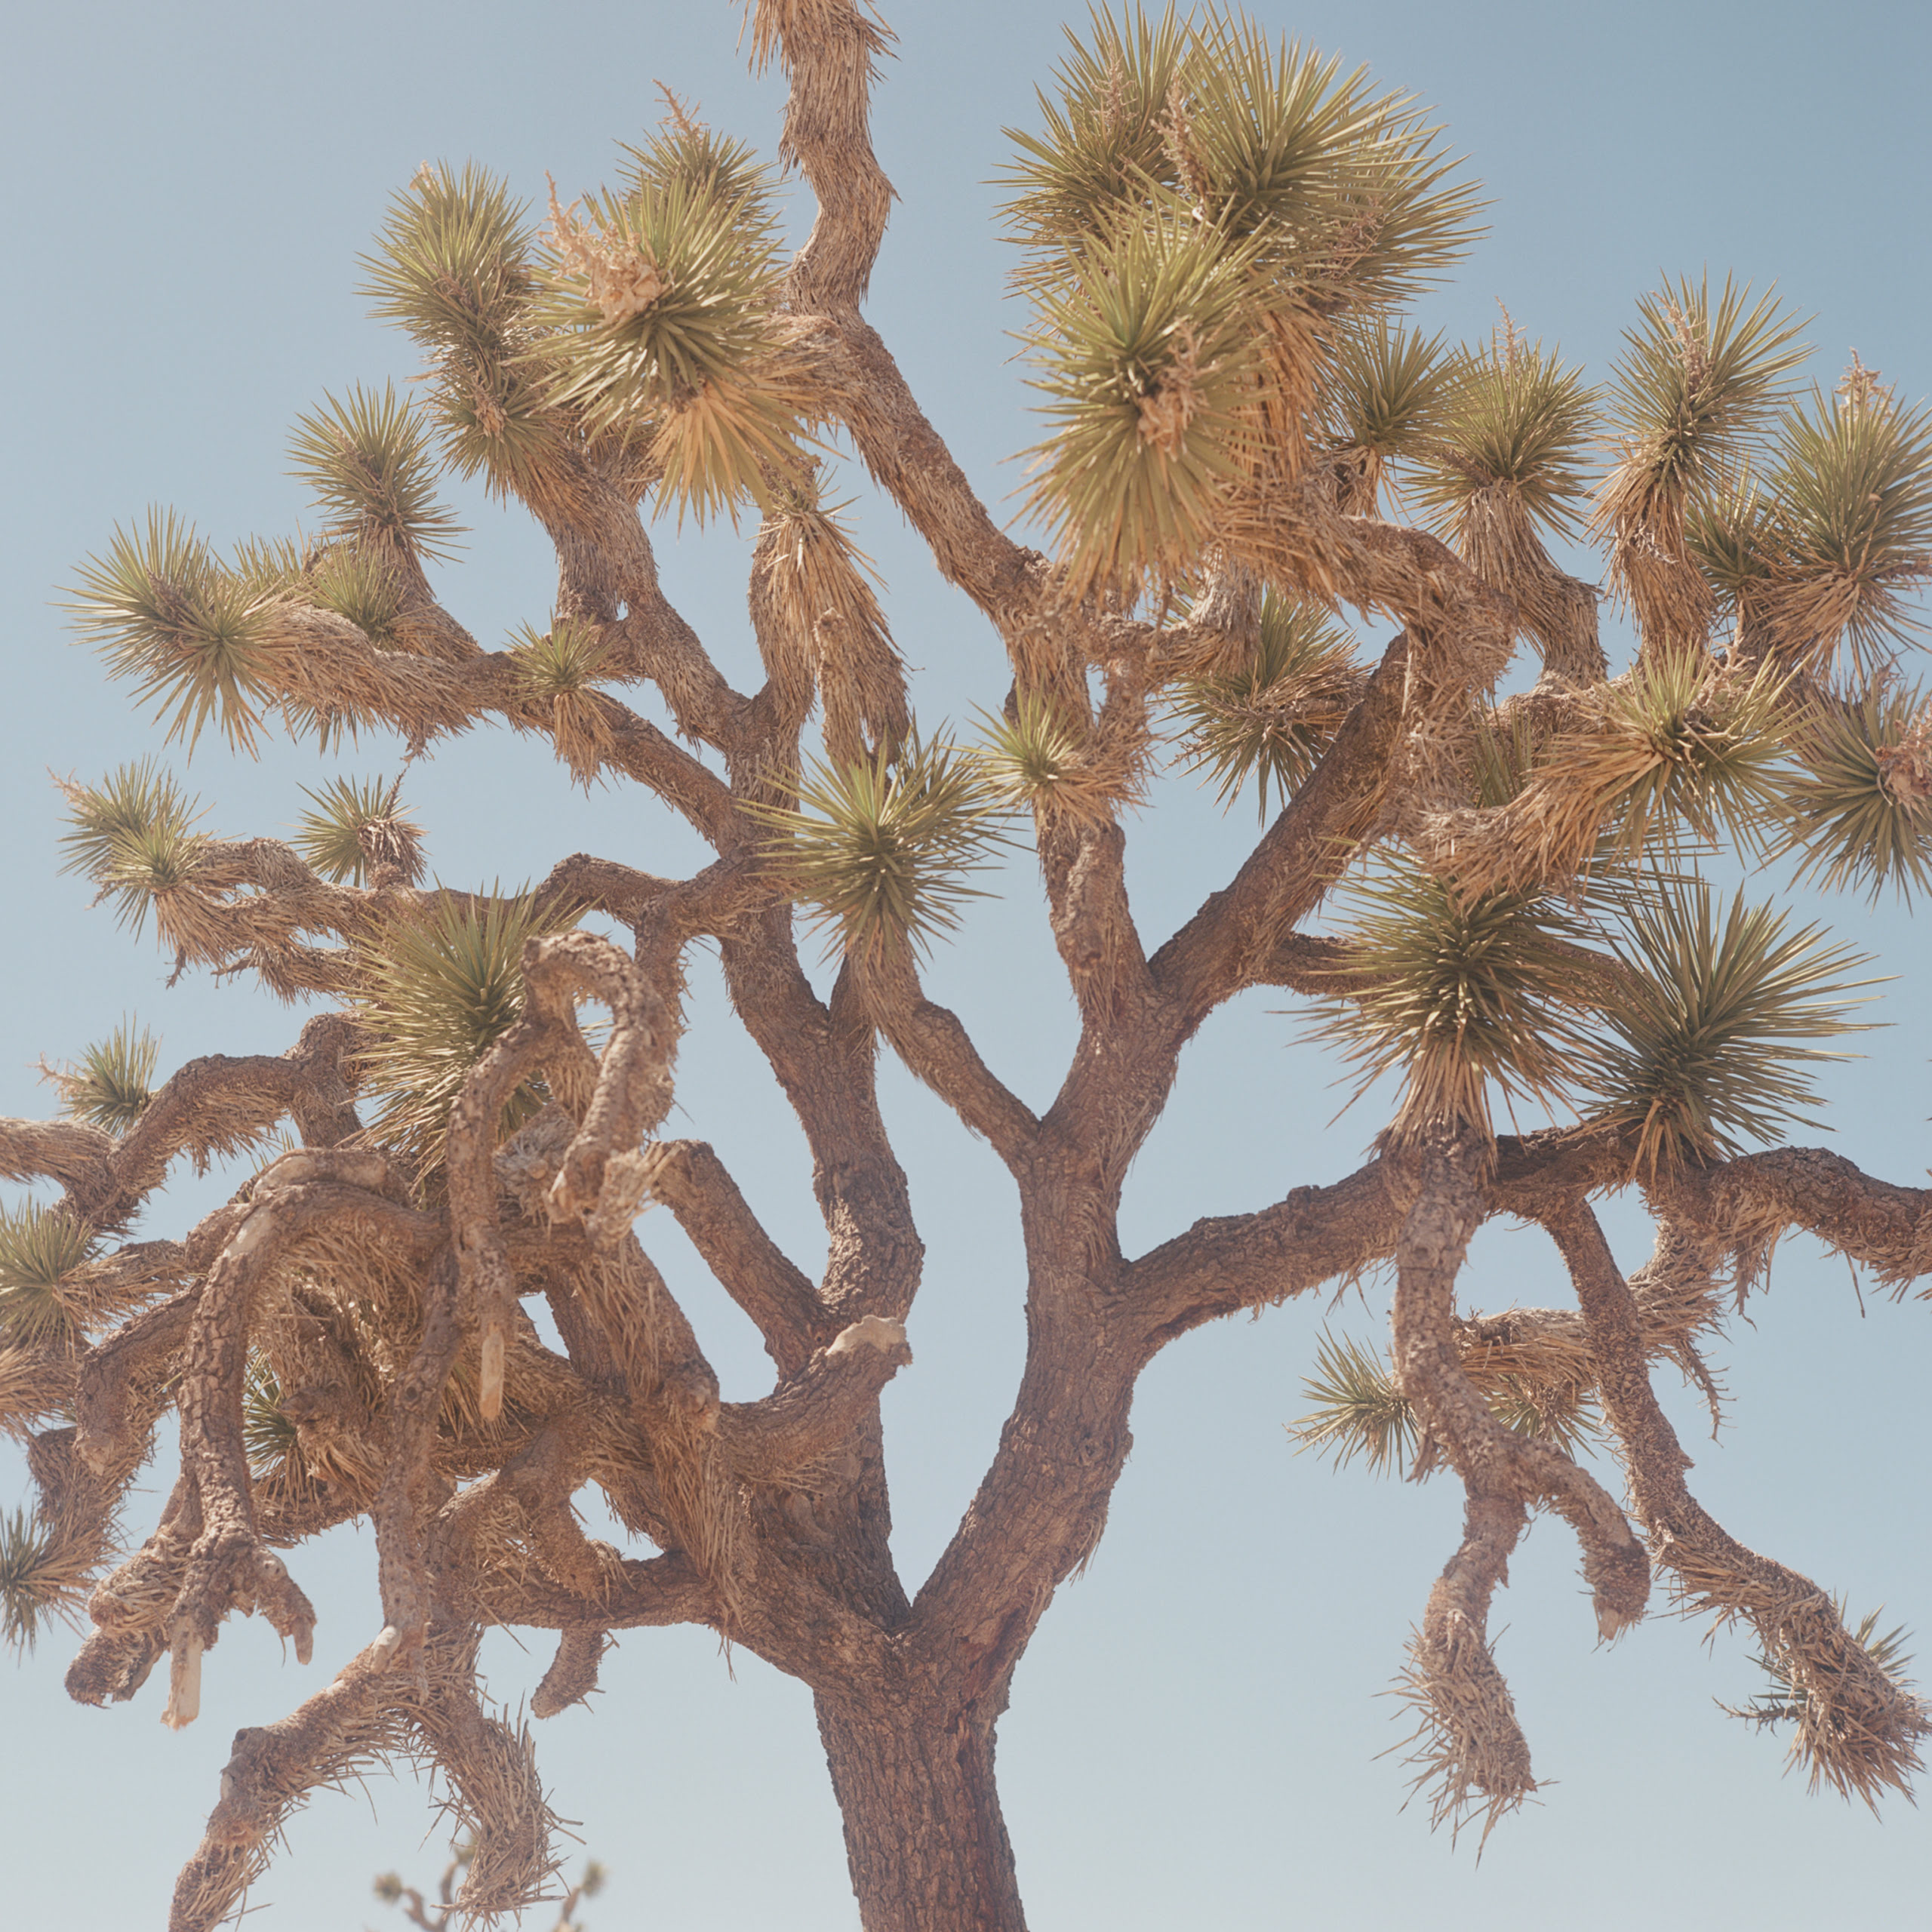 Close-up picture of a tree in the desert.